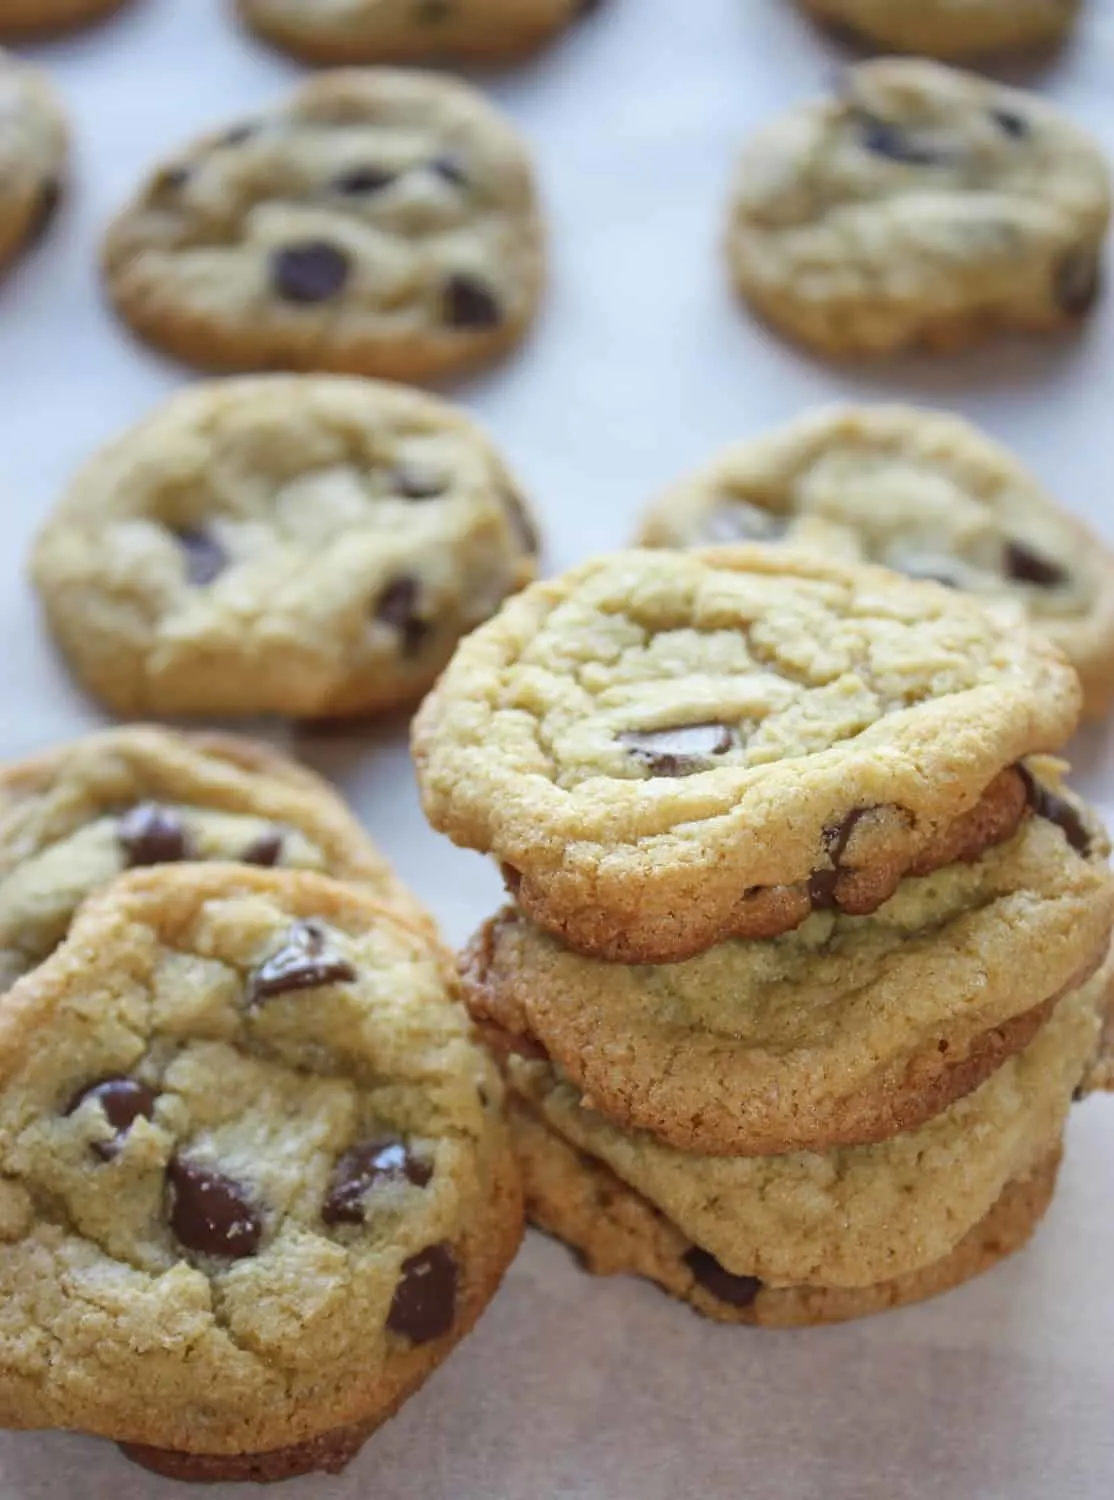 Chocolate Chip Cookies are probably a staple in most homes and just because I have to eat gluten free does not mean that I have to do without these tasty cookies.